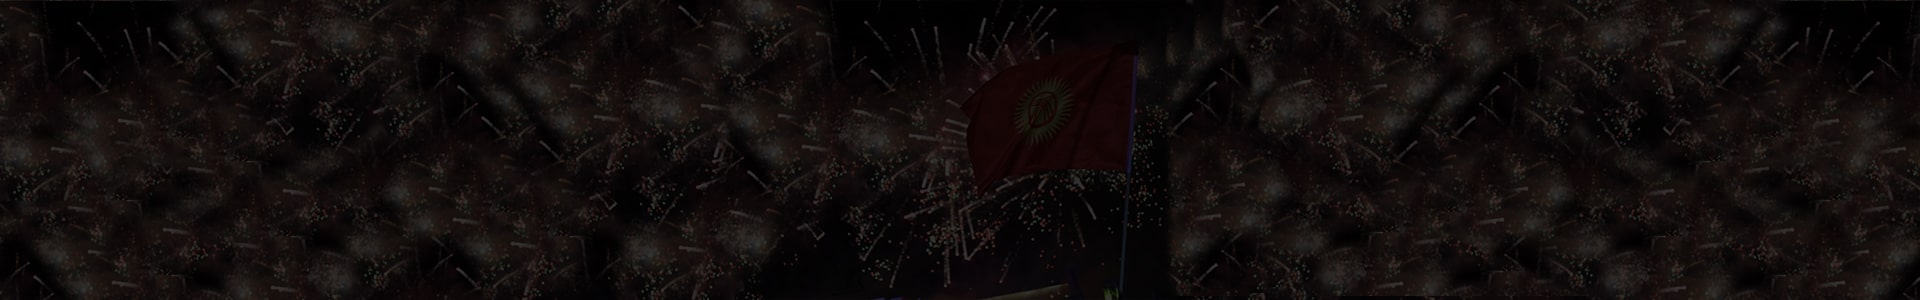 independence day kyrgyzstan